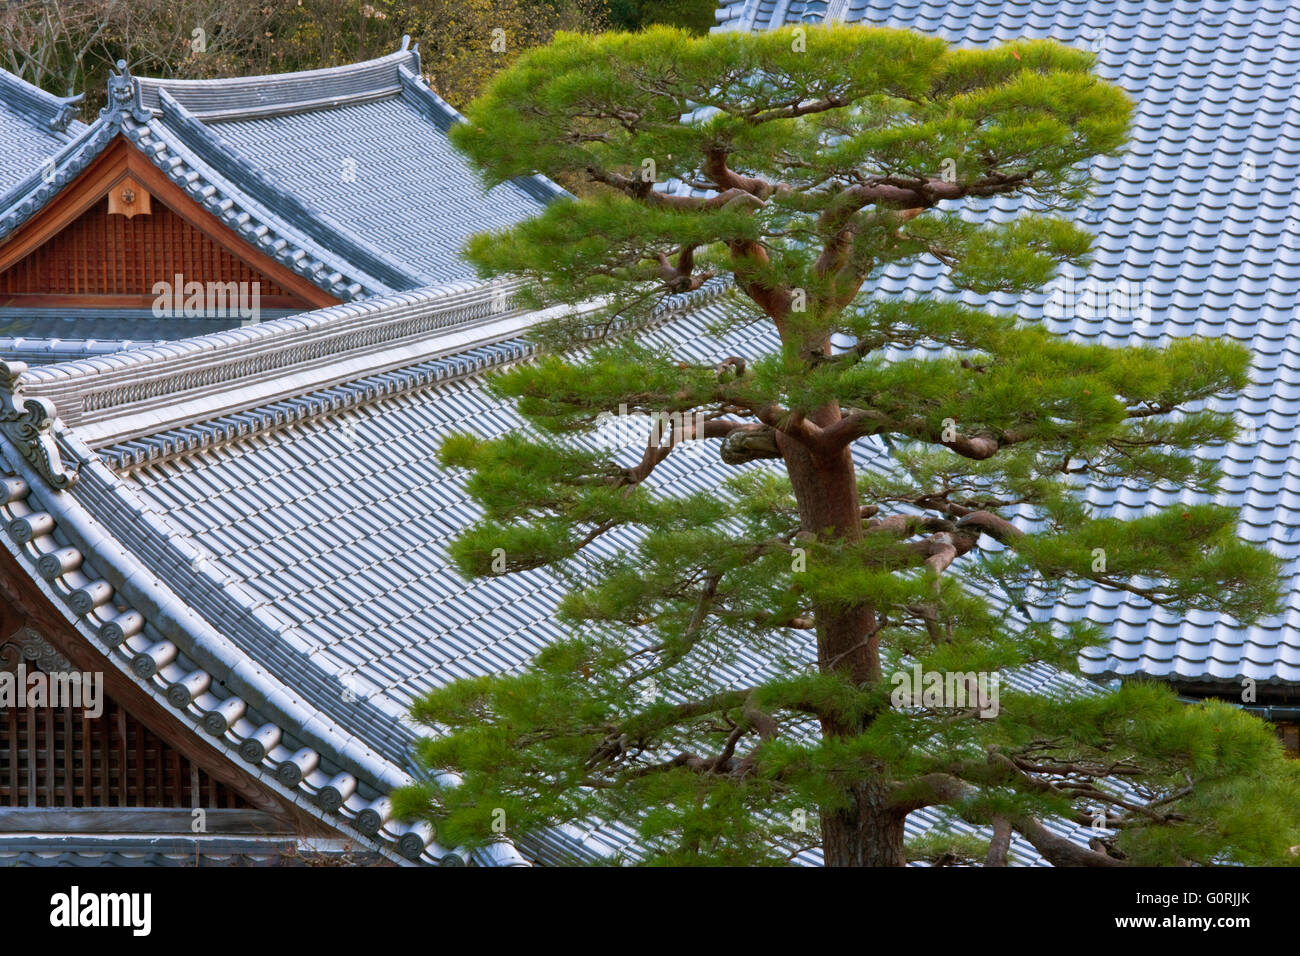 A telephoto view shows an akamatsu red pine tree sculpted to bonsai-like perfection in front of kawara ceramic tiled roofs at Komyo-ji, a Buddhist temple in the southwest outskirts of Kyoto, Japan. Stock Photo